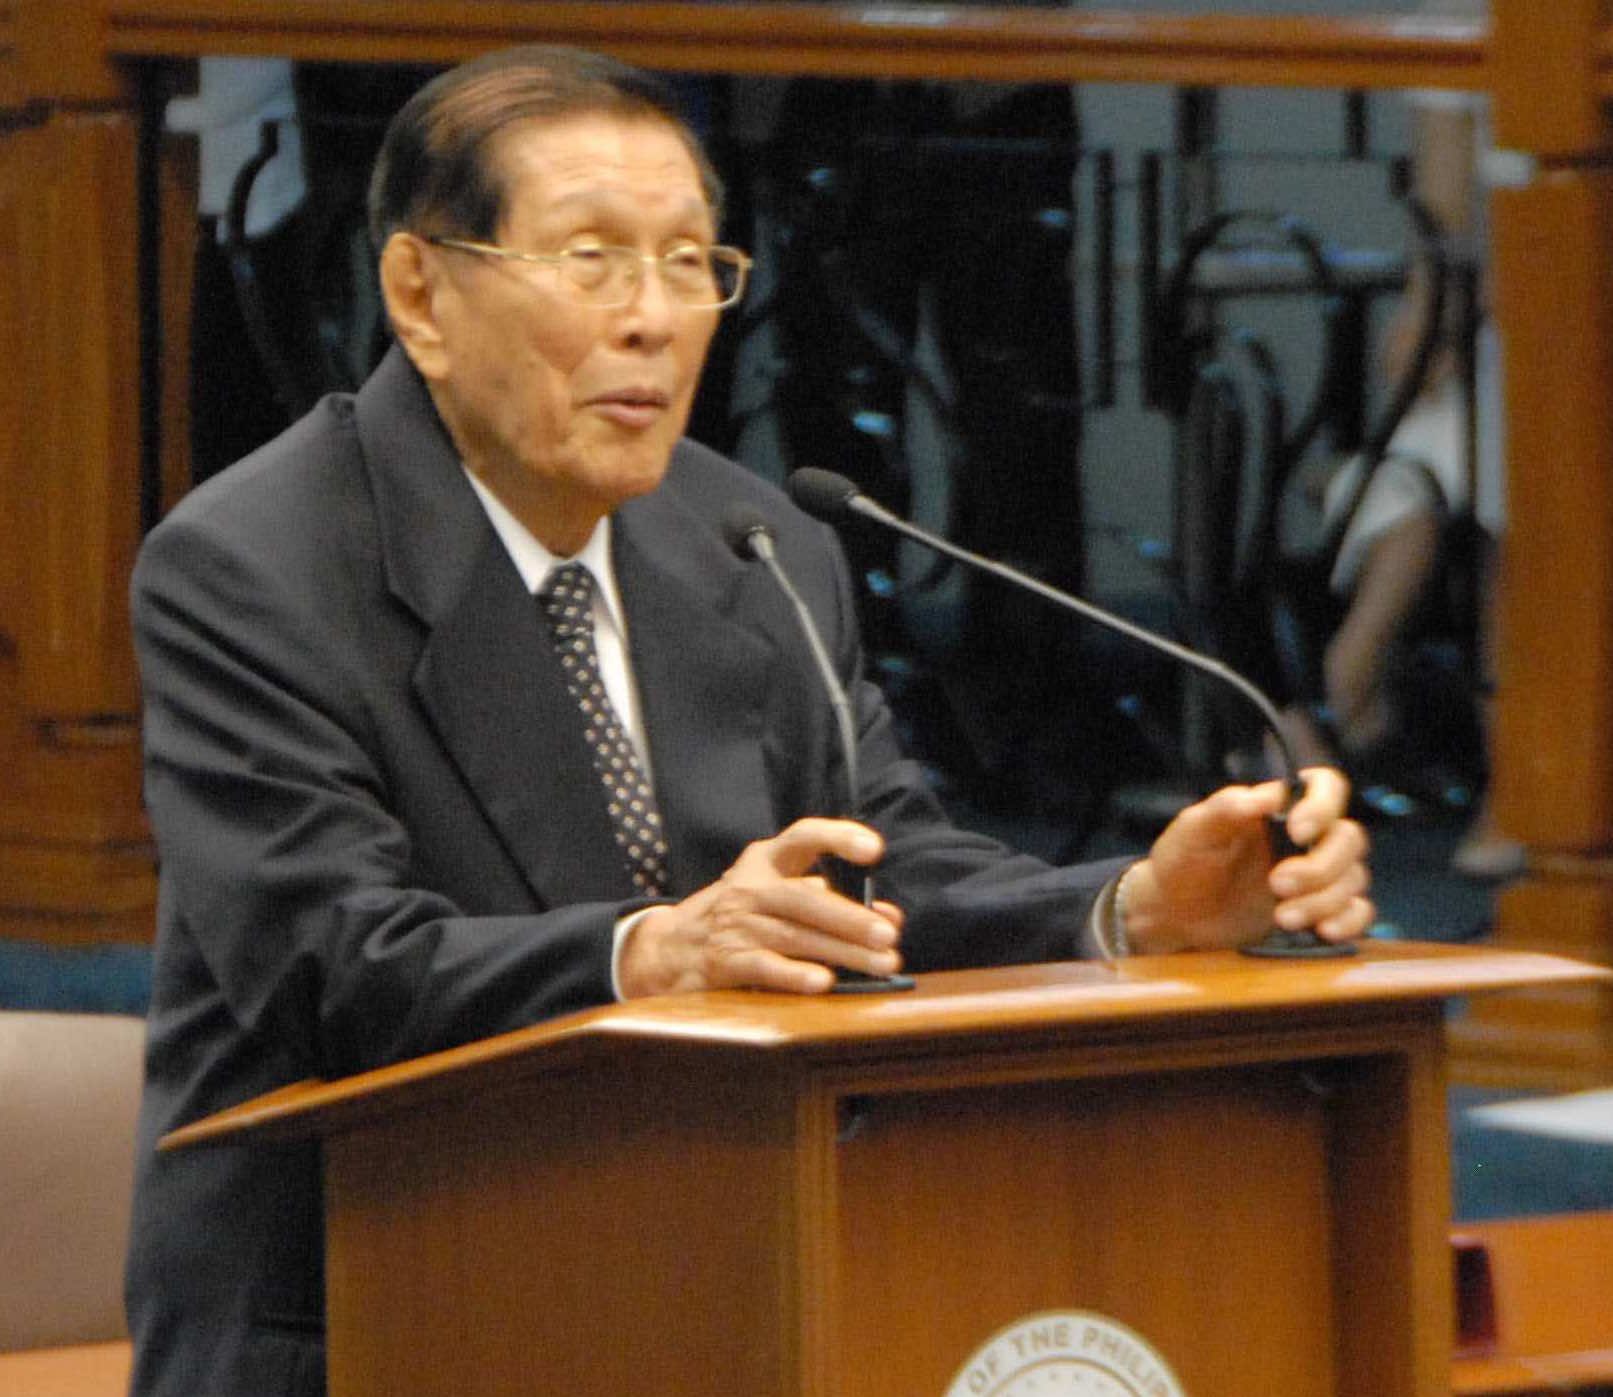 Enrile’s Senate farewell: ‘Old politicians don’t die, they just fade away’